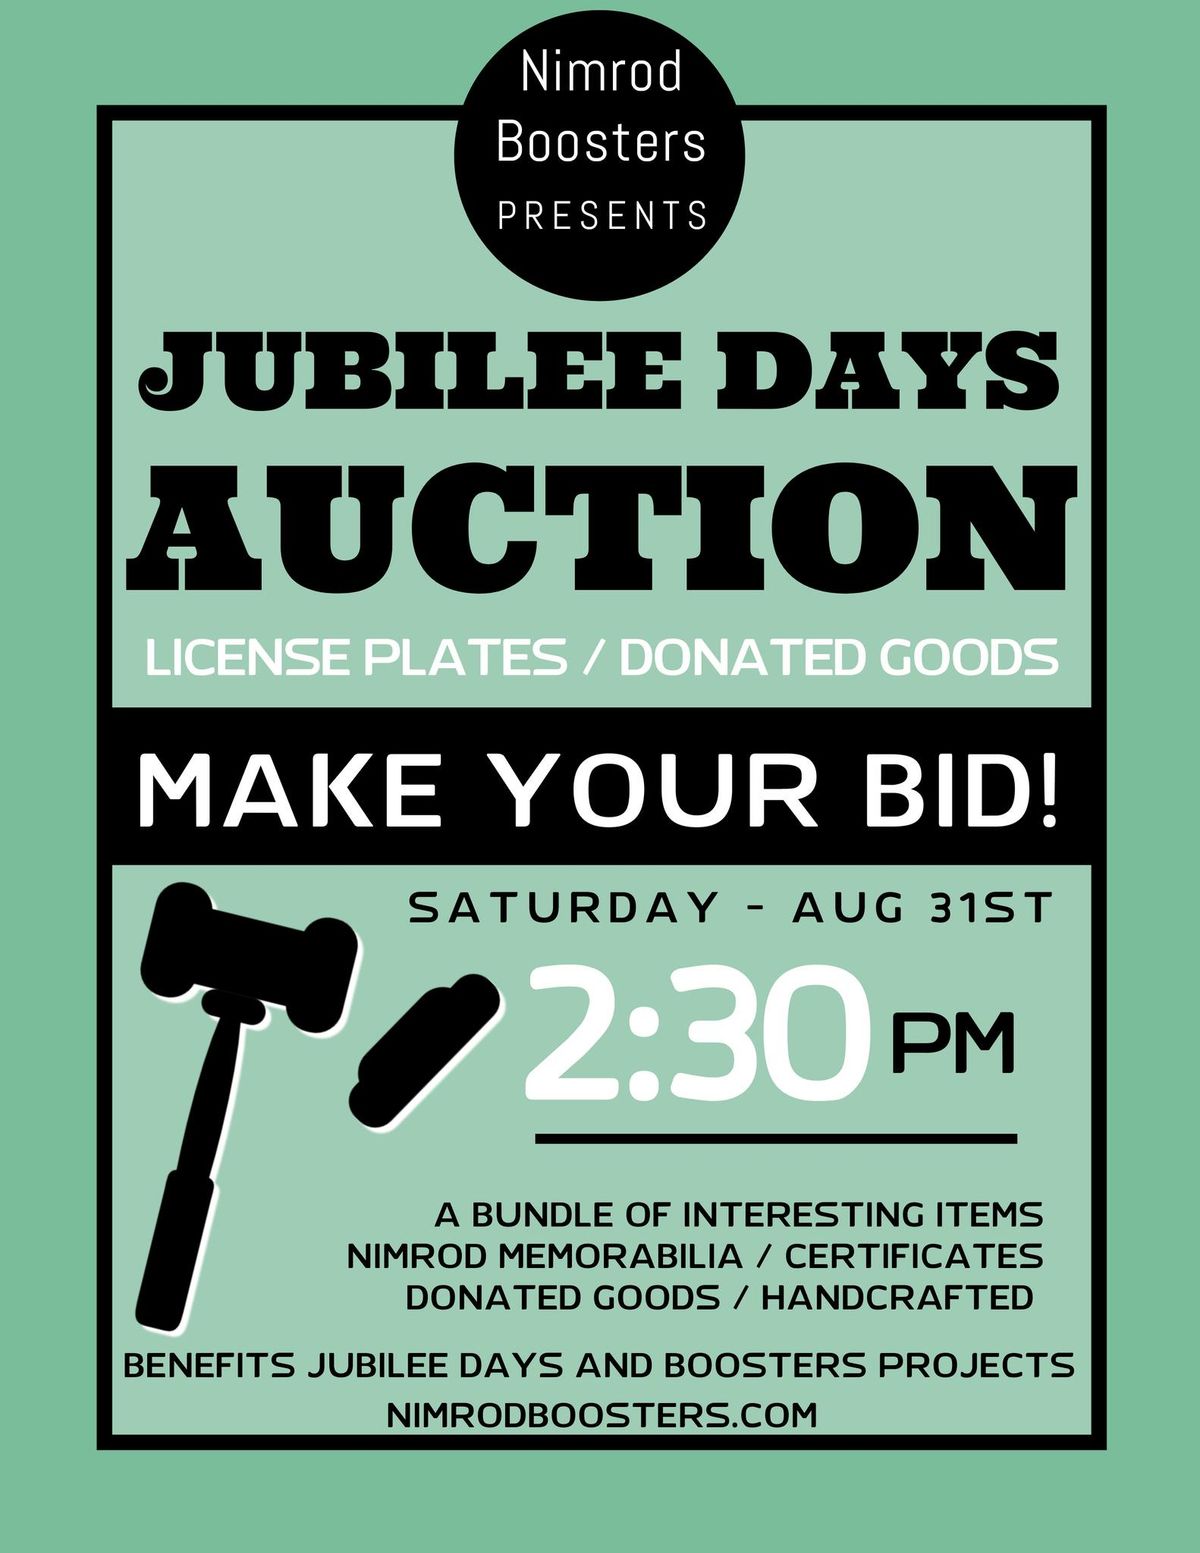 Jubilee Days Auction